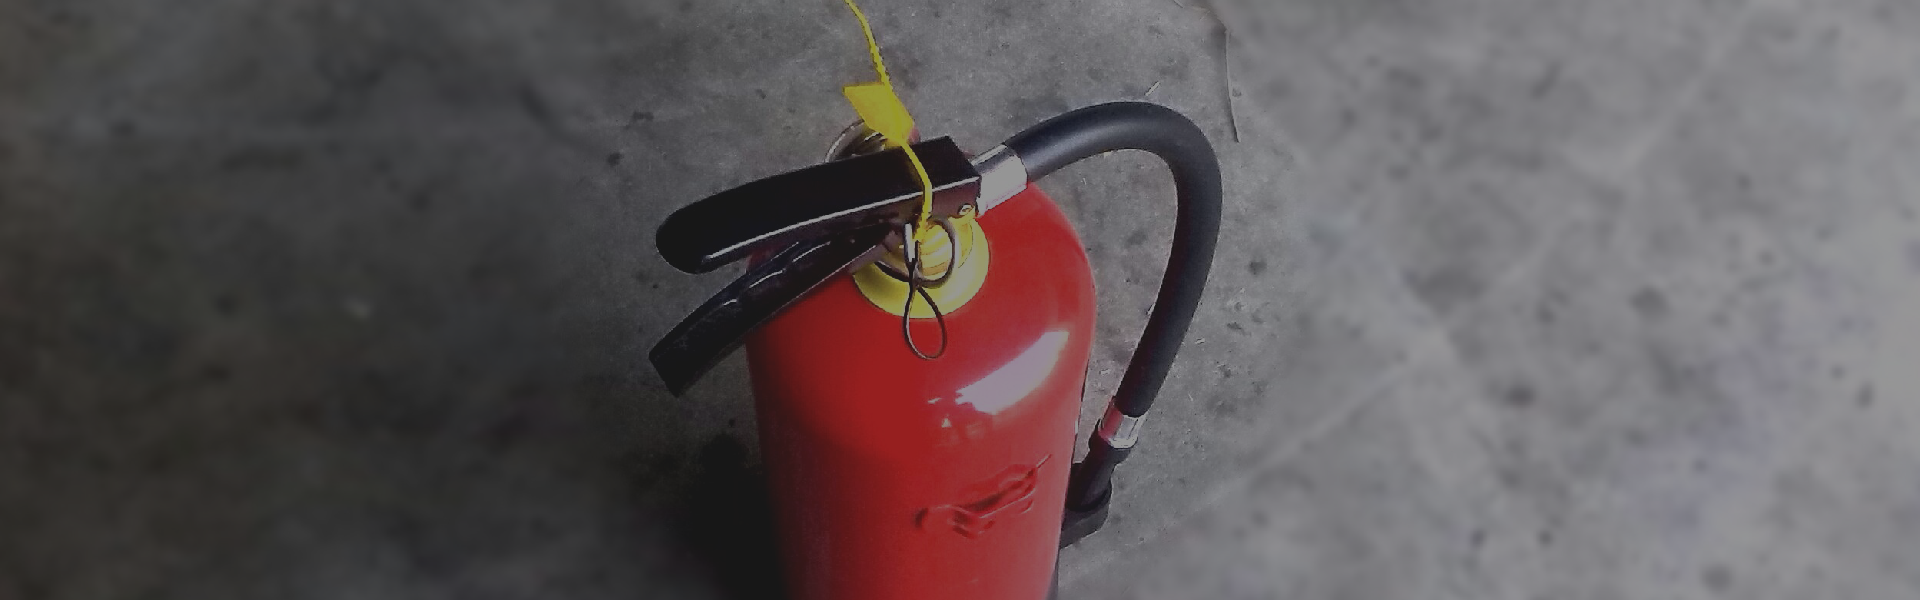 Paying Too Much On Your Extinguisher Service?